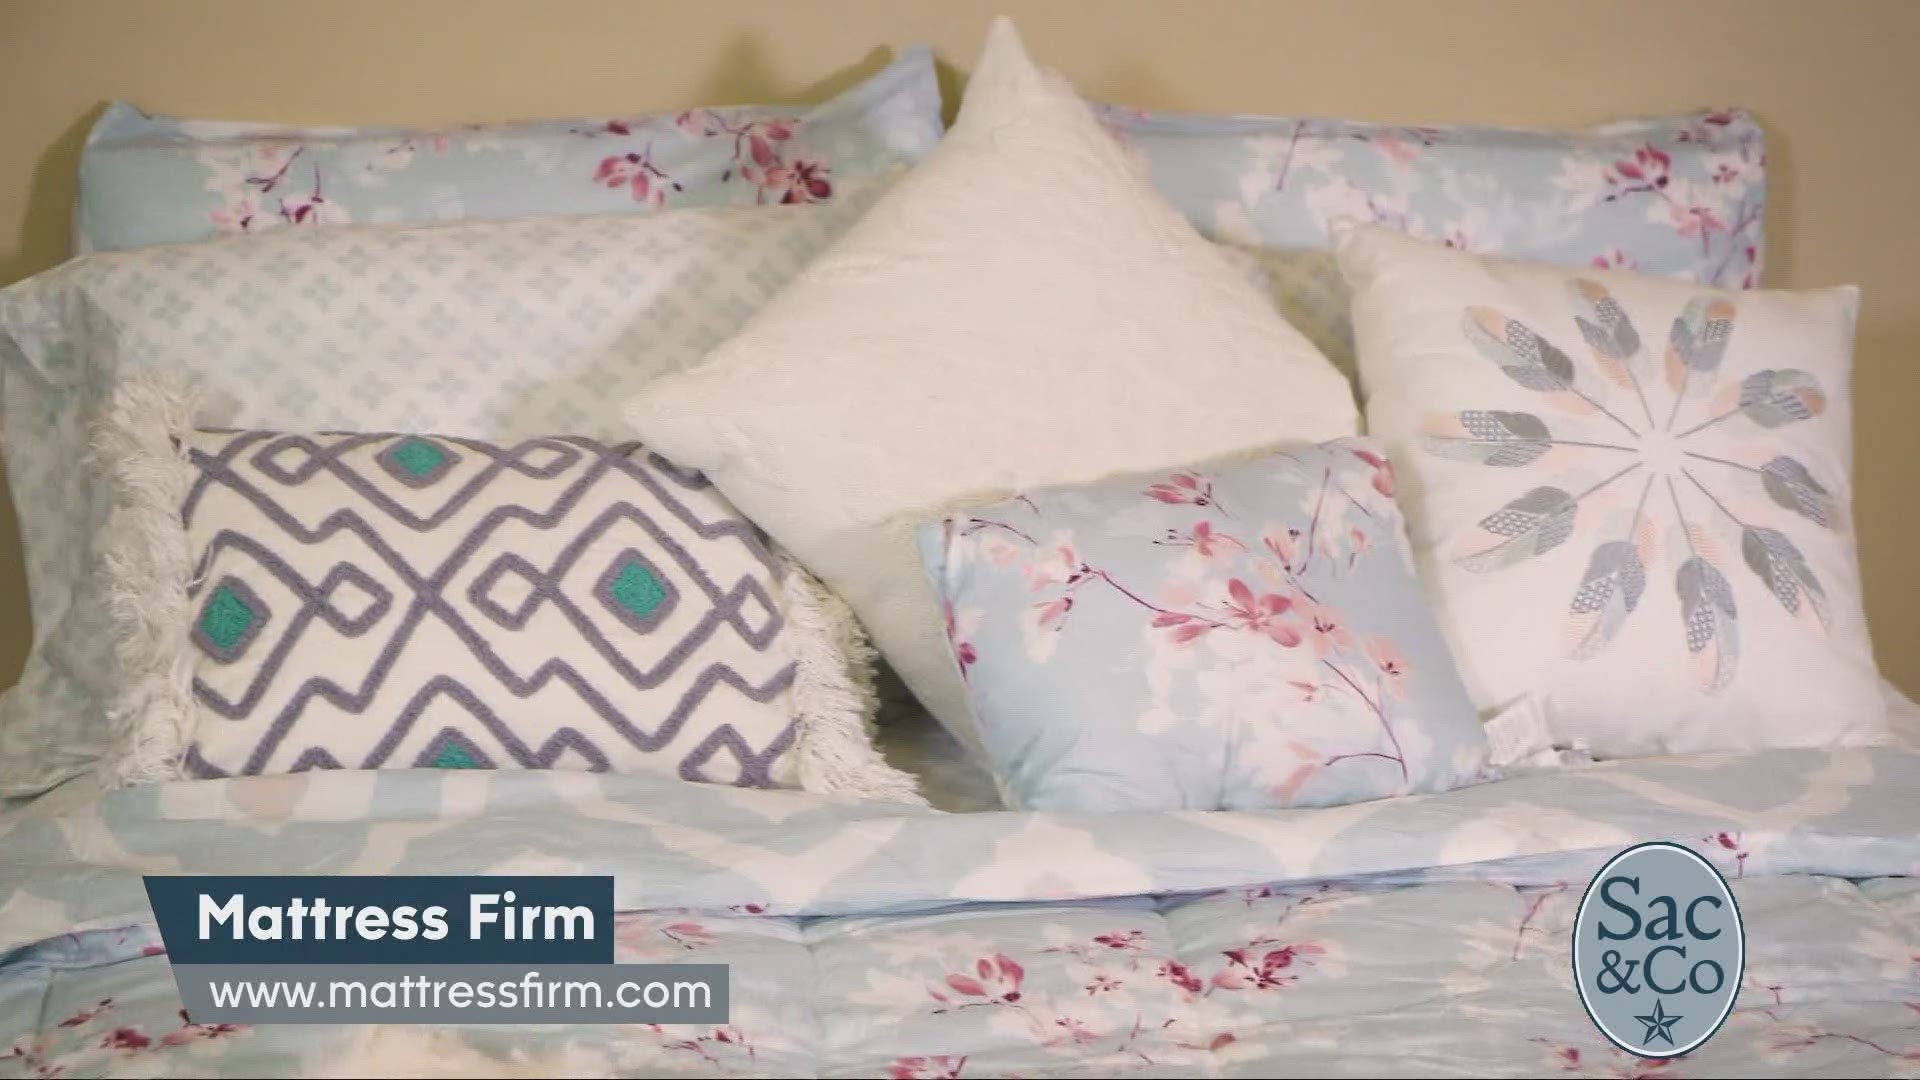 Mattress Firm can help you find everything you need to revamp your bedroom as well as the best mattress! The following is a paid segment sponsored by Mattress Firm.